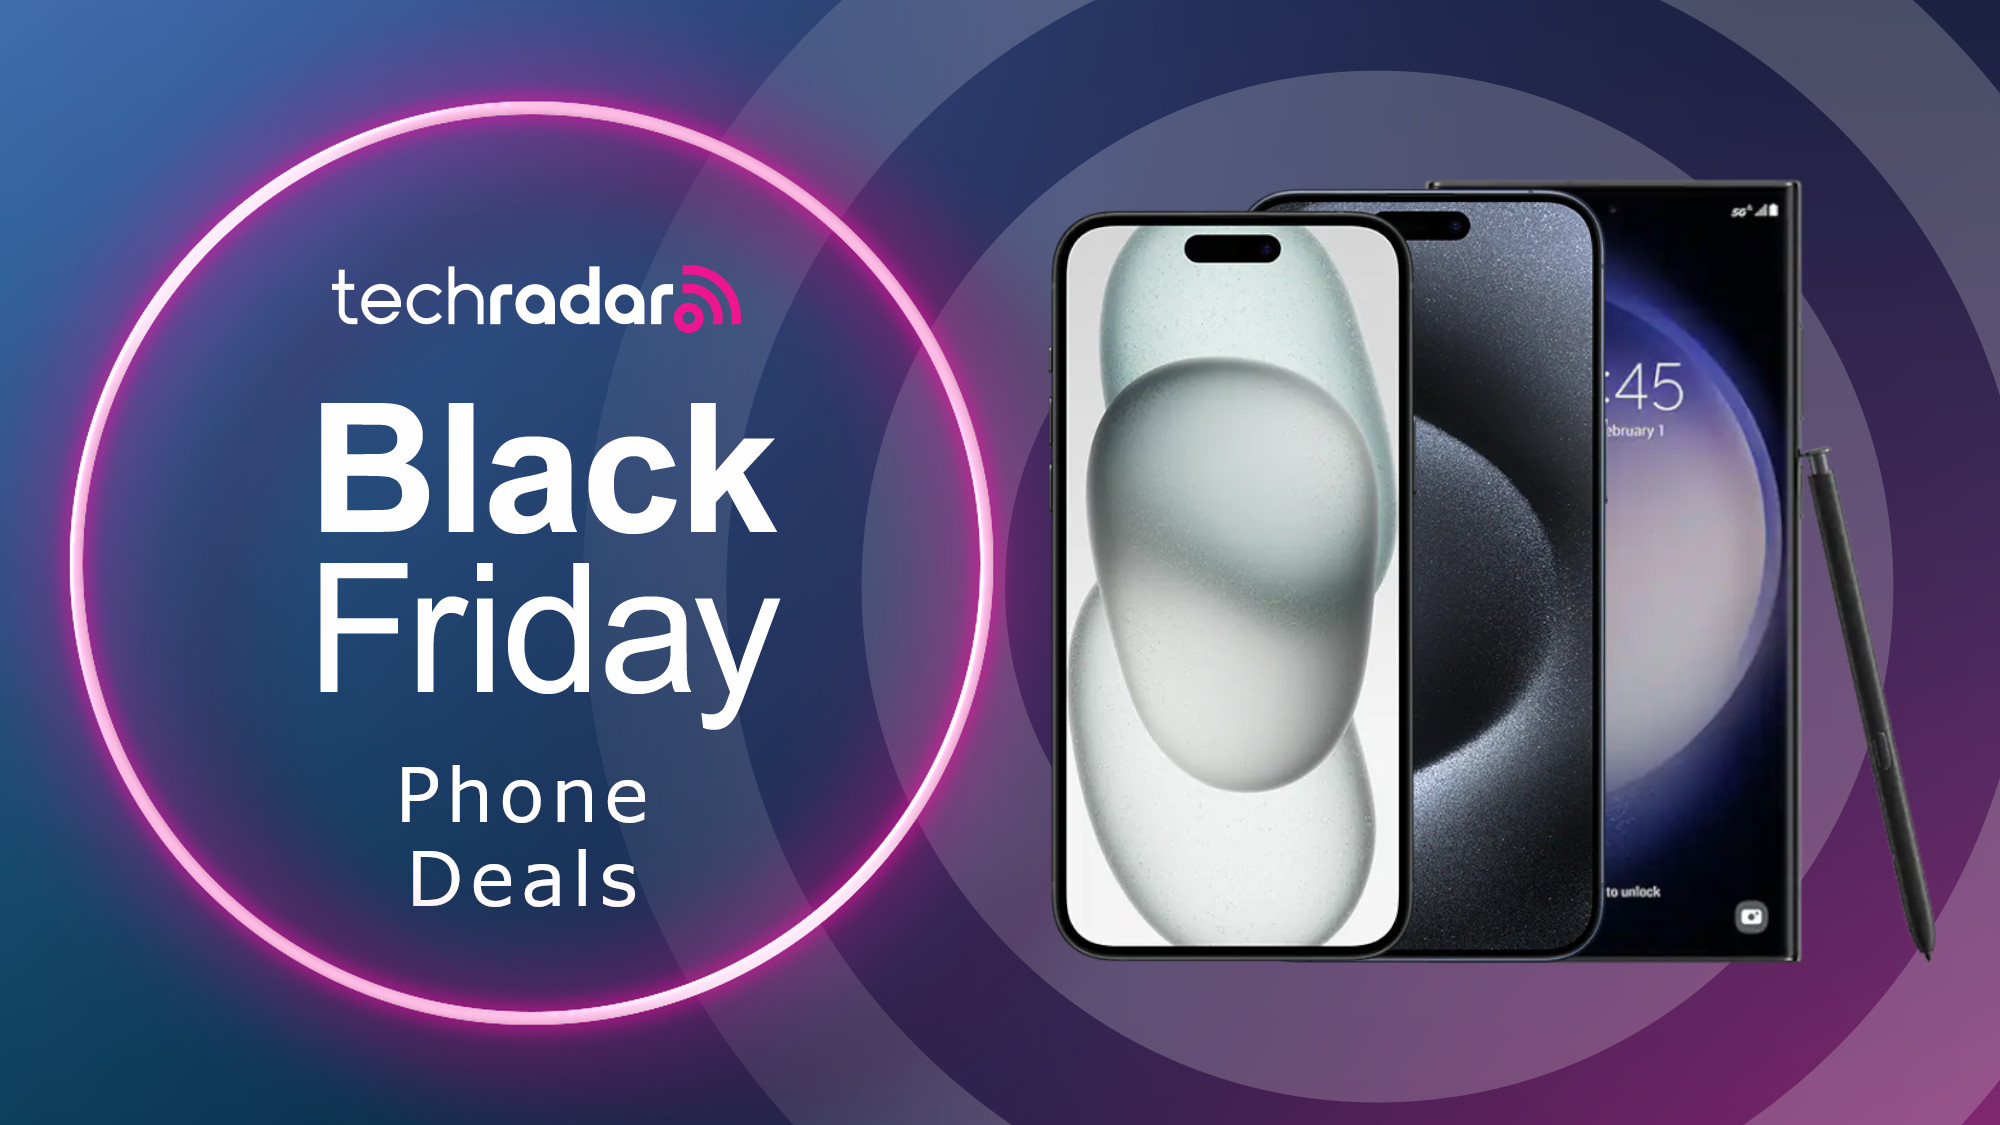 Good news: Black Friday carrier deals are just as good online as